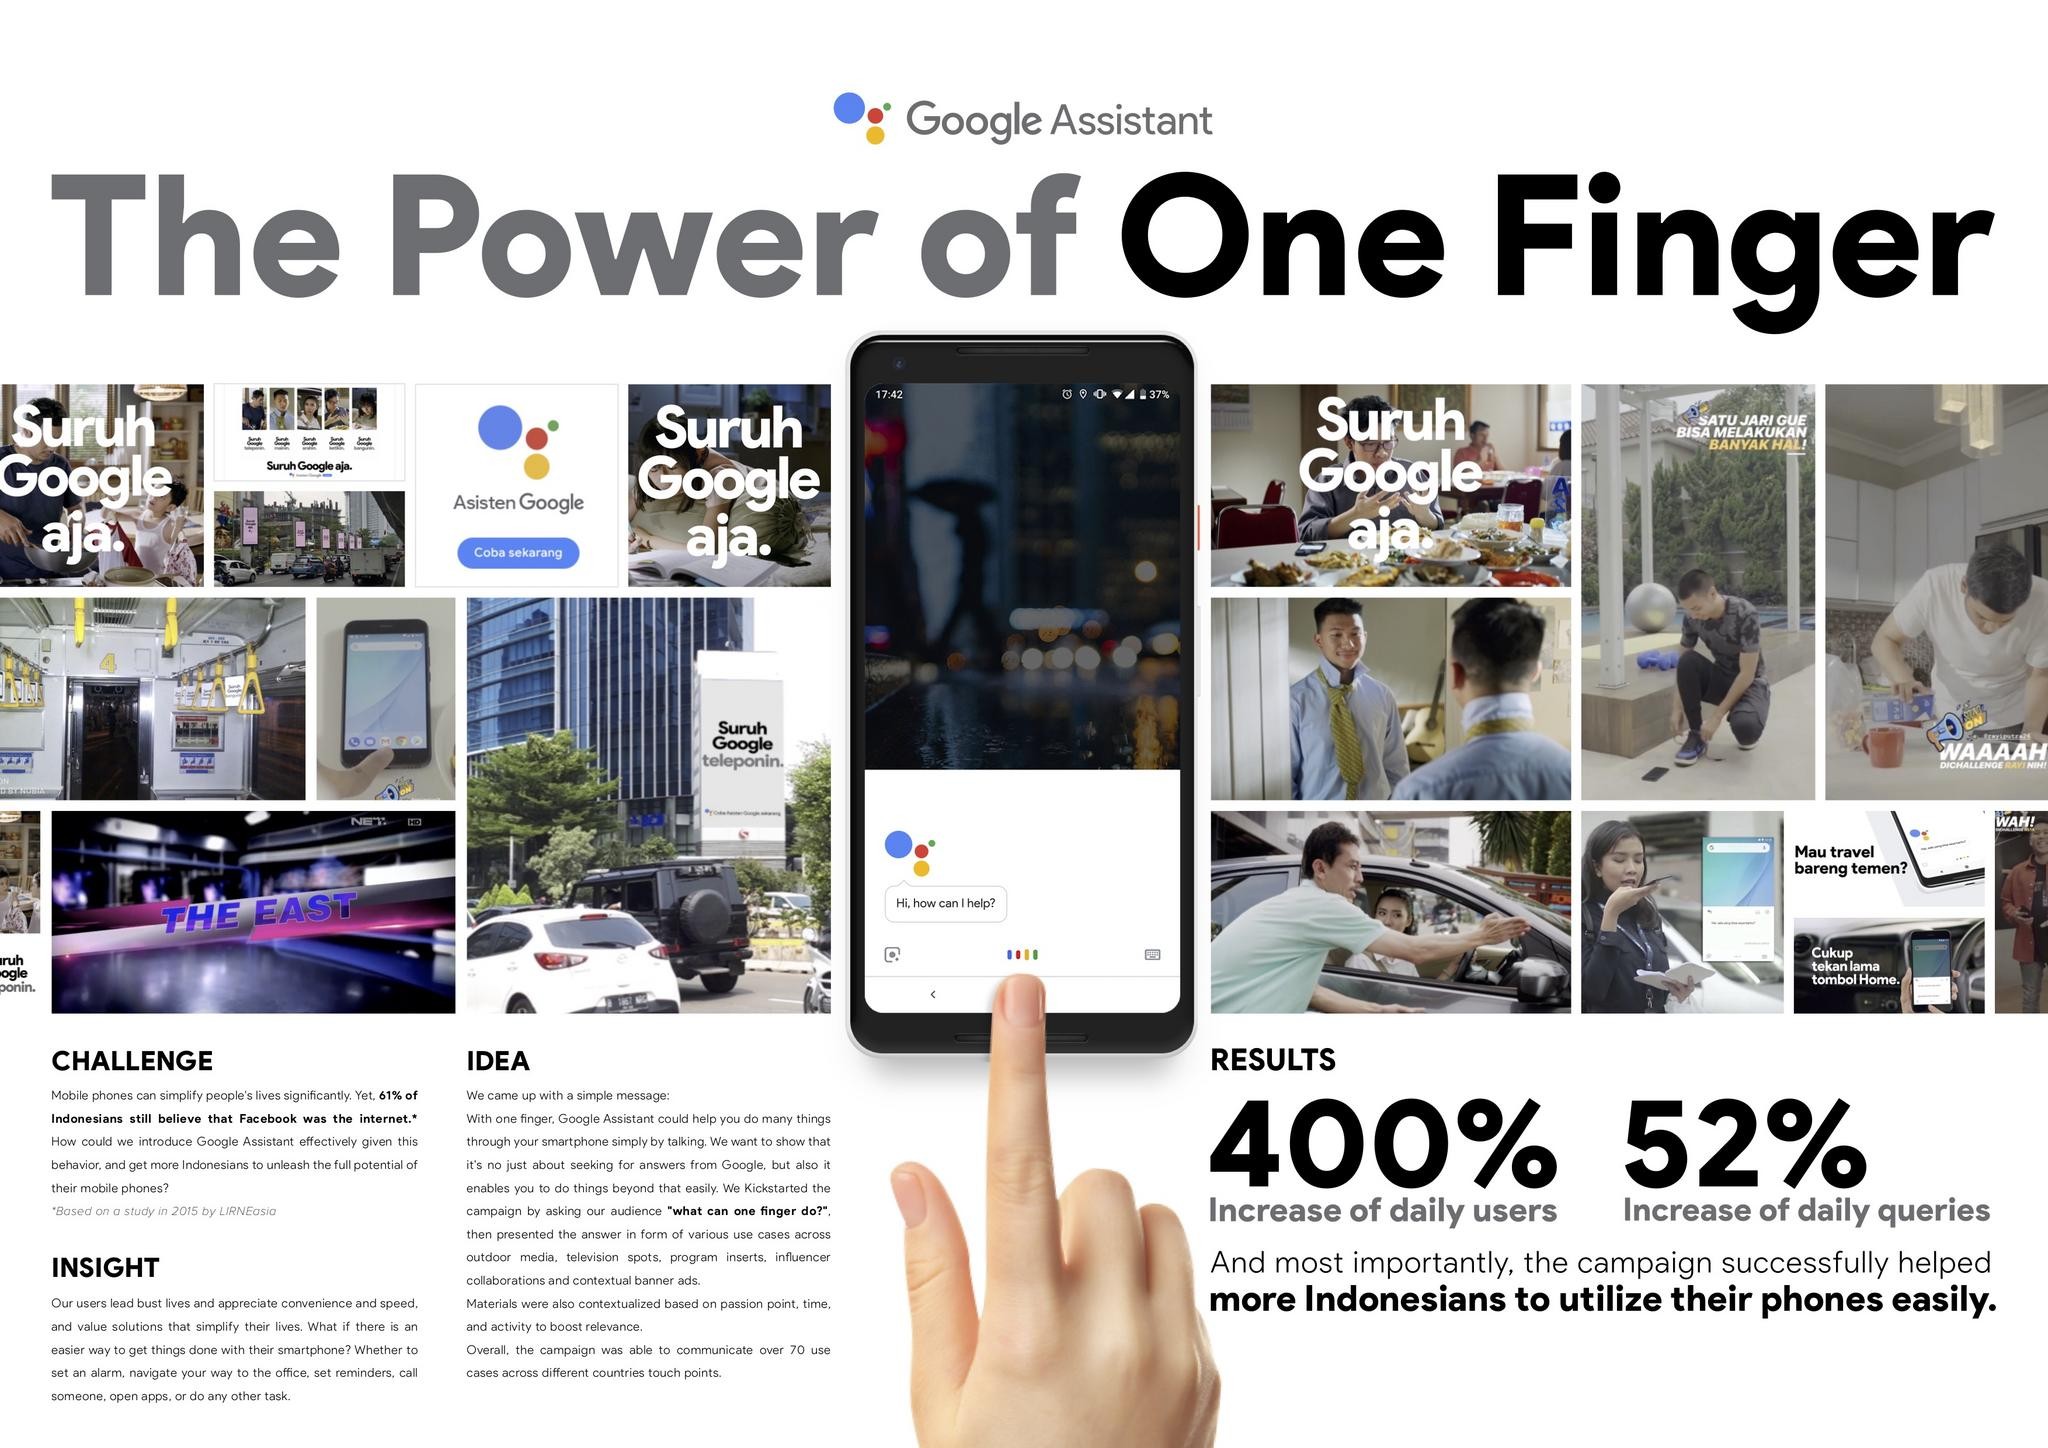 “The Power of One Finger”